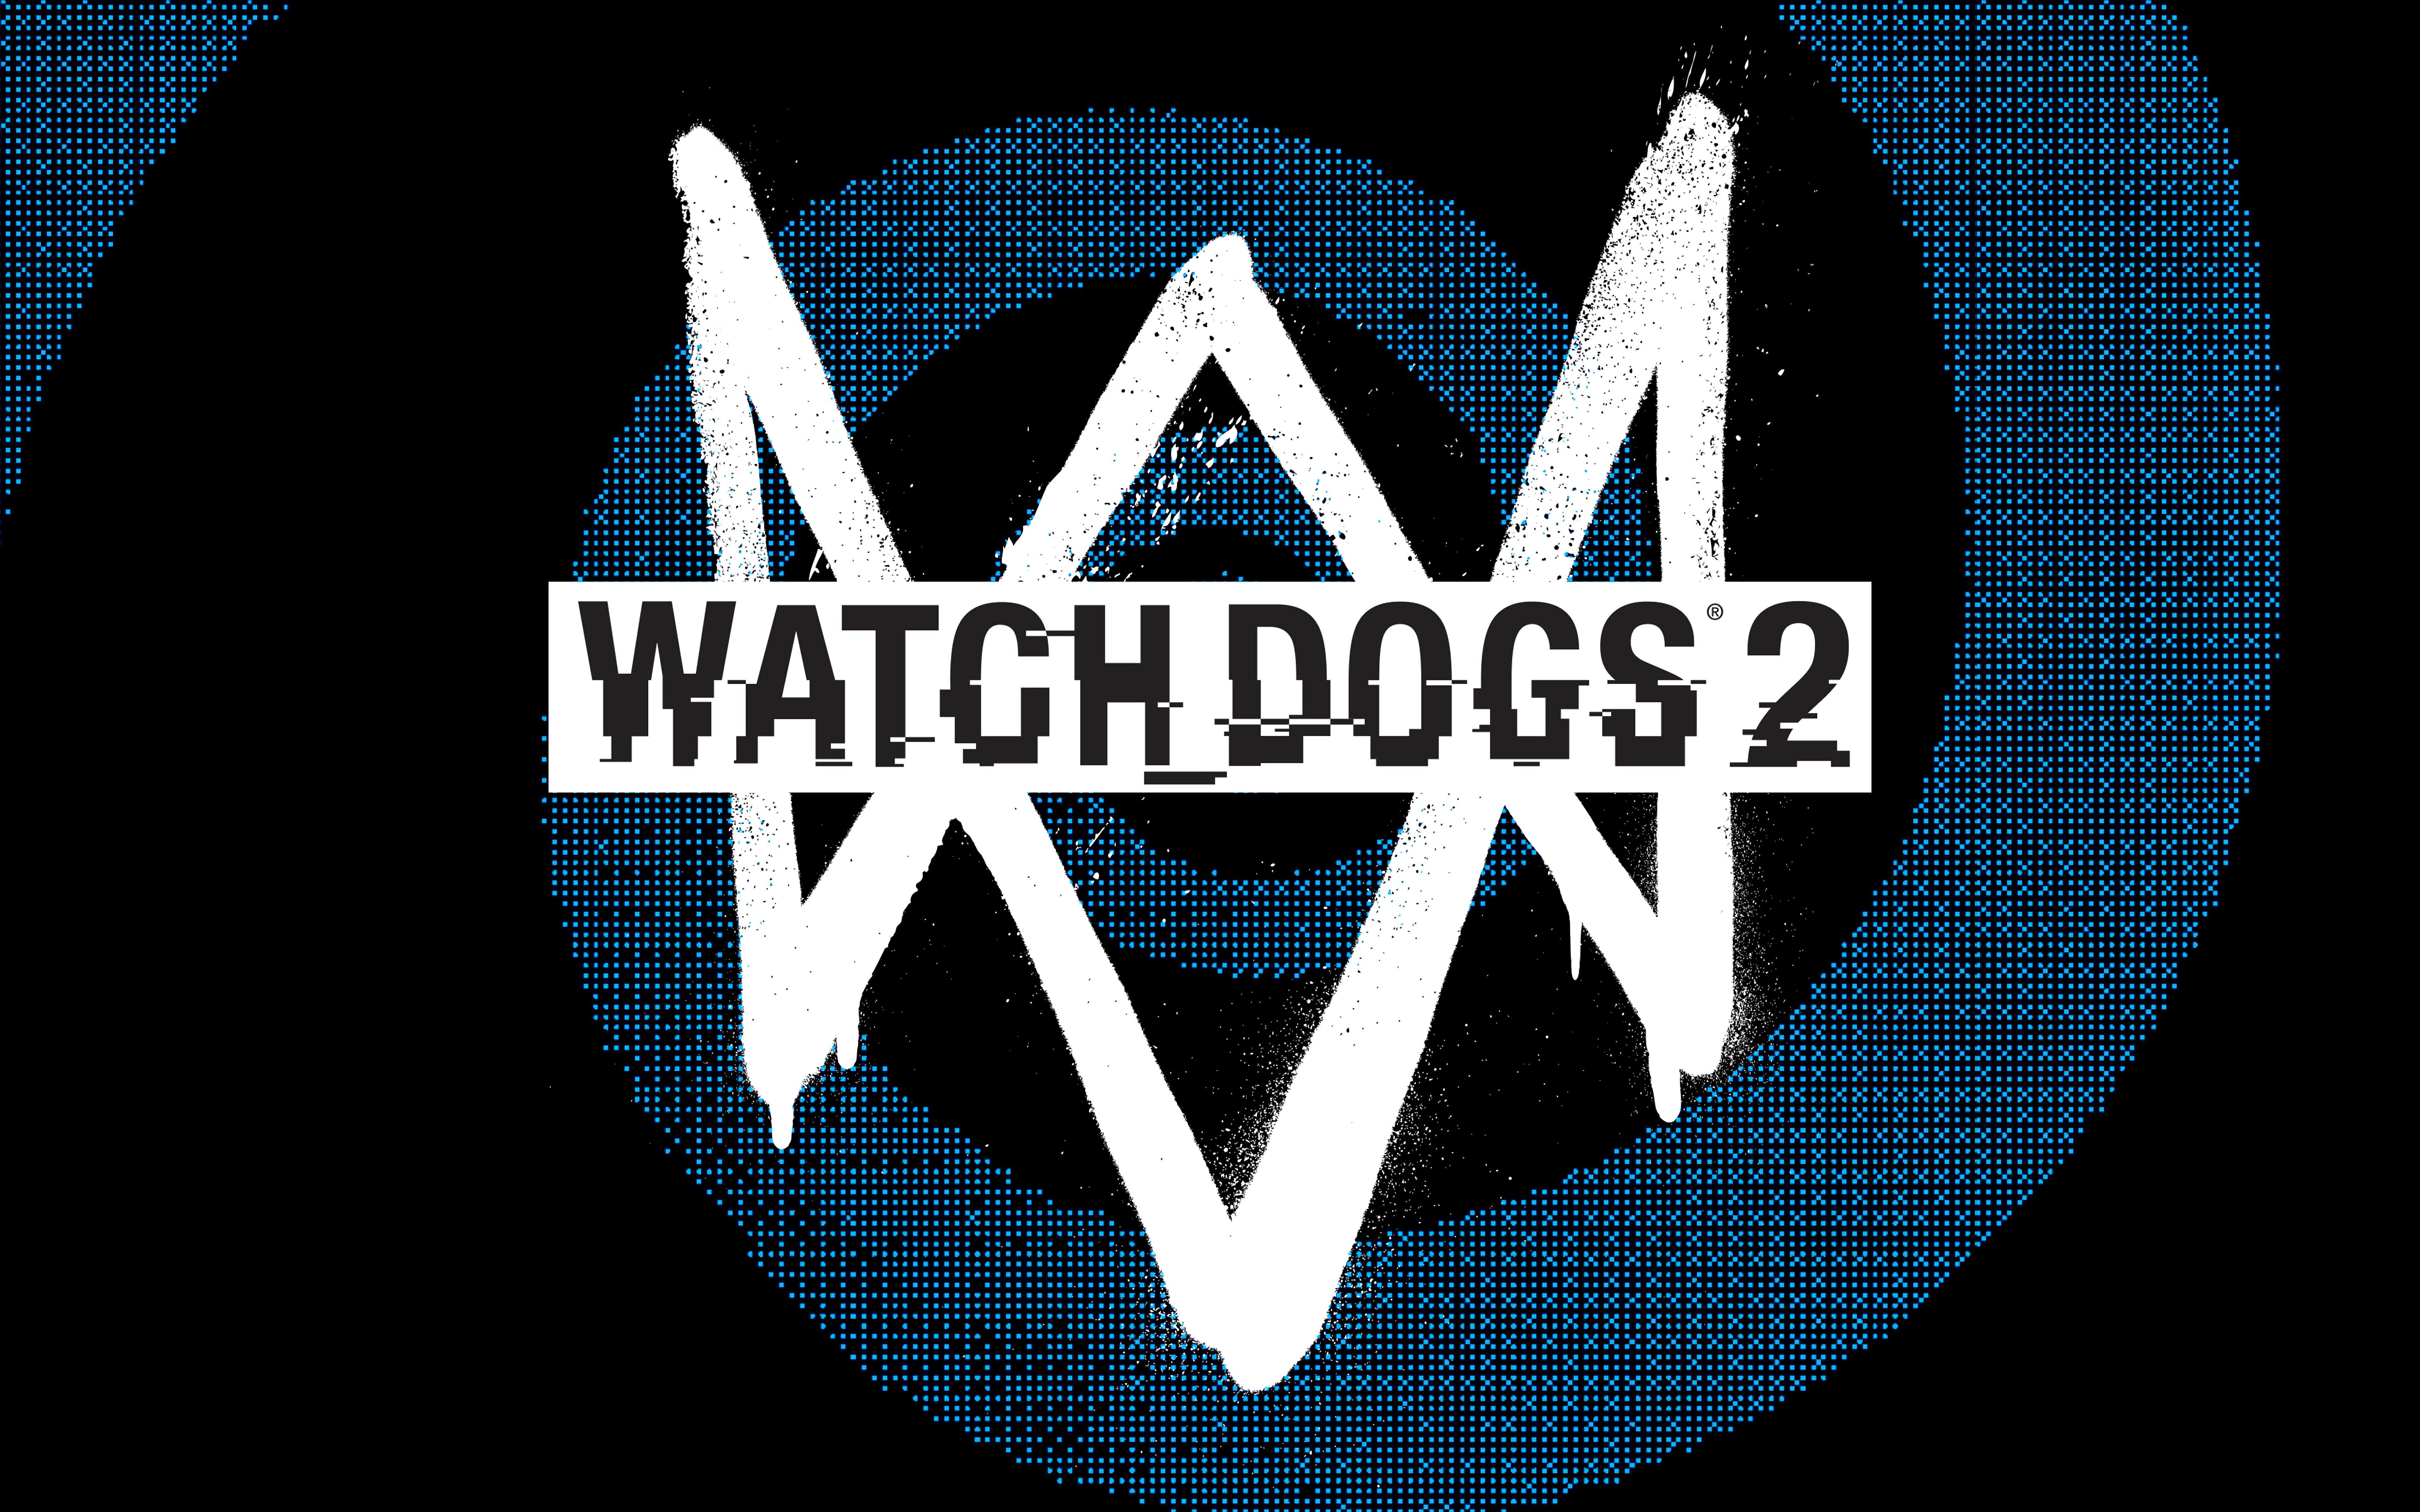 watch dogs, video game, watch dogs 2, logo phone background